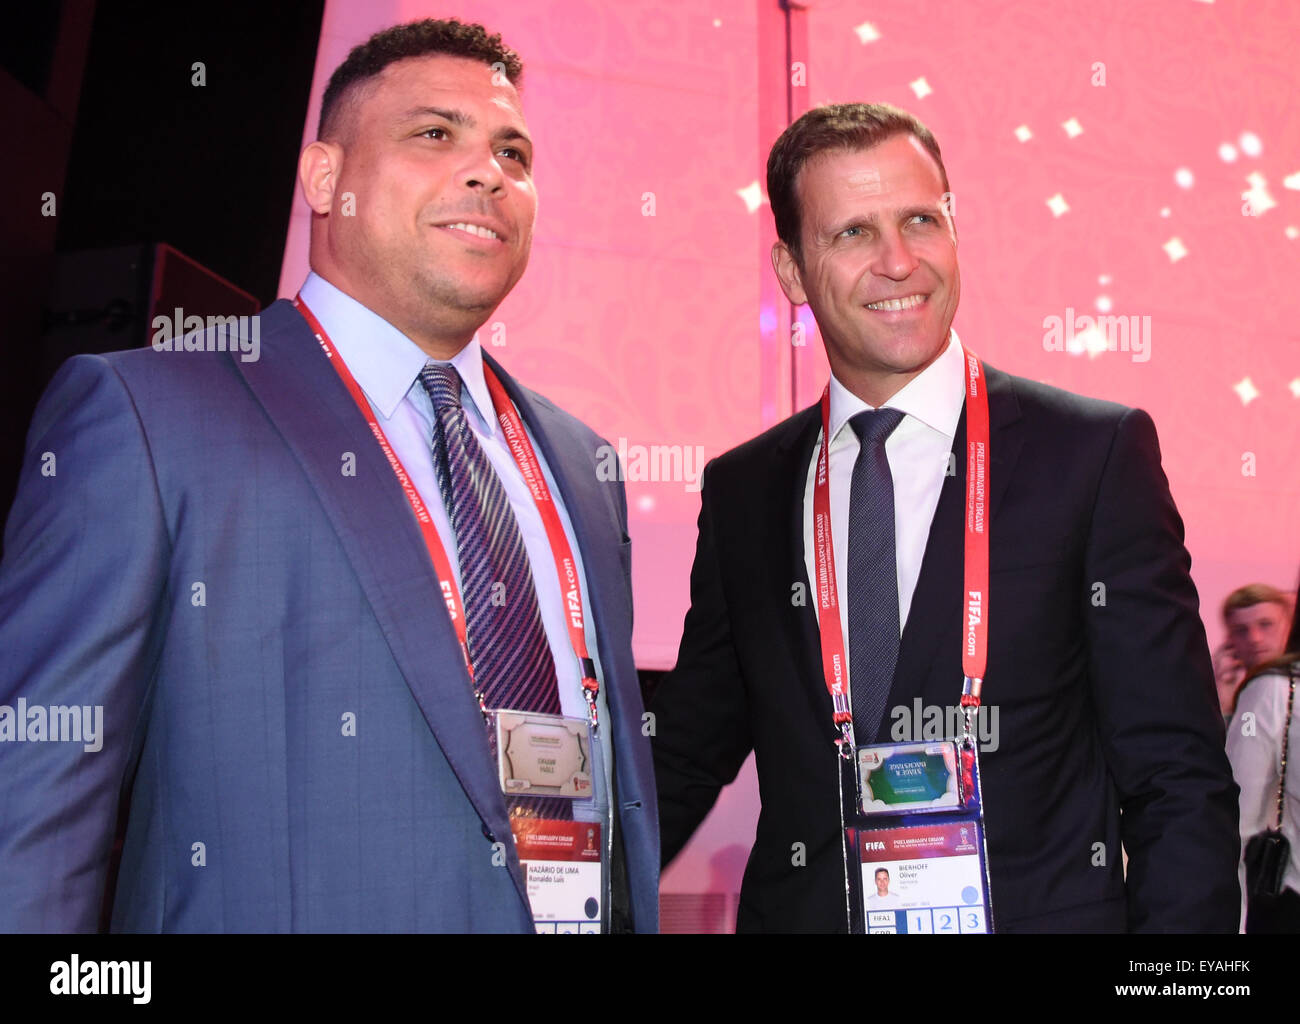 St. Petersburg, Russia. 25th July, 2015. Oliver Bierhoff (R), team manager of the German national soccer team, and former professional soccer player Ronaldo from Brazil attend the Preliminary Draw of the FIFA World Cup 2018 in St. Petersburg, Russia, 25 July 2015. St. Petersburg is one of the host cities of the FIFA World Cup 2018 in Russia which will take place from 14 June until 15 July 2018. Photo: MARCUS BRANDT/dpa Credit:  dpa picture alliance/Alamy Live News Stock Photo